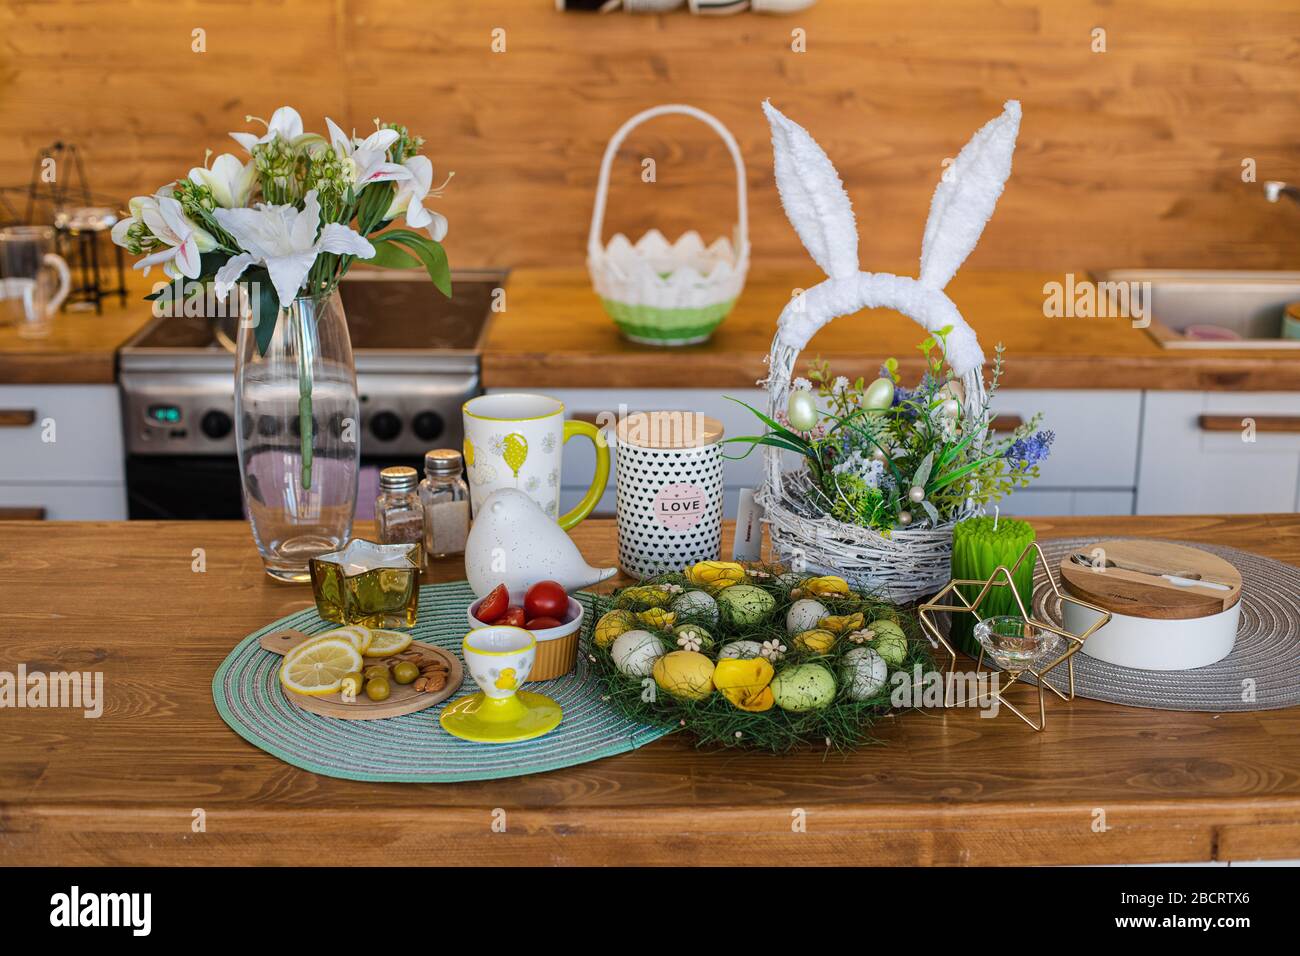 Lemons, olives, almonds on a wooden board, Easter eggs at the back Stock Photo